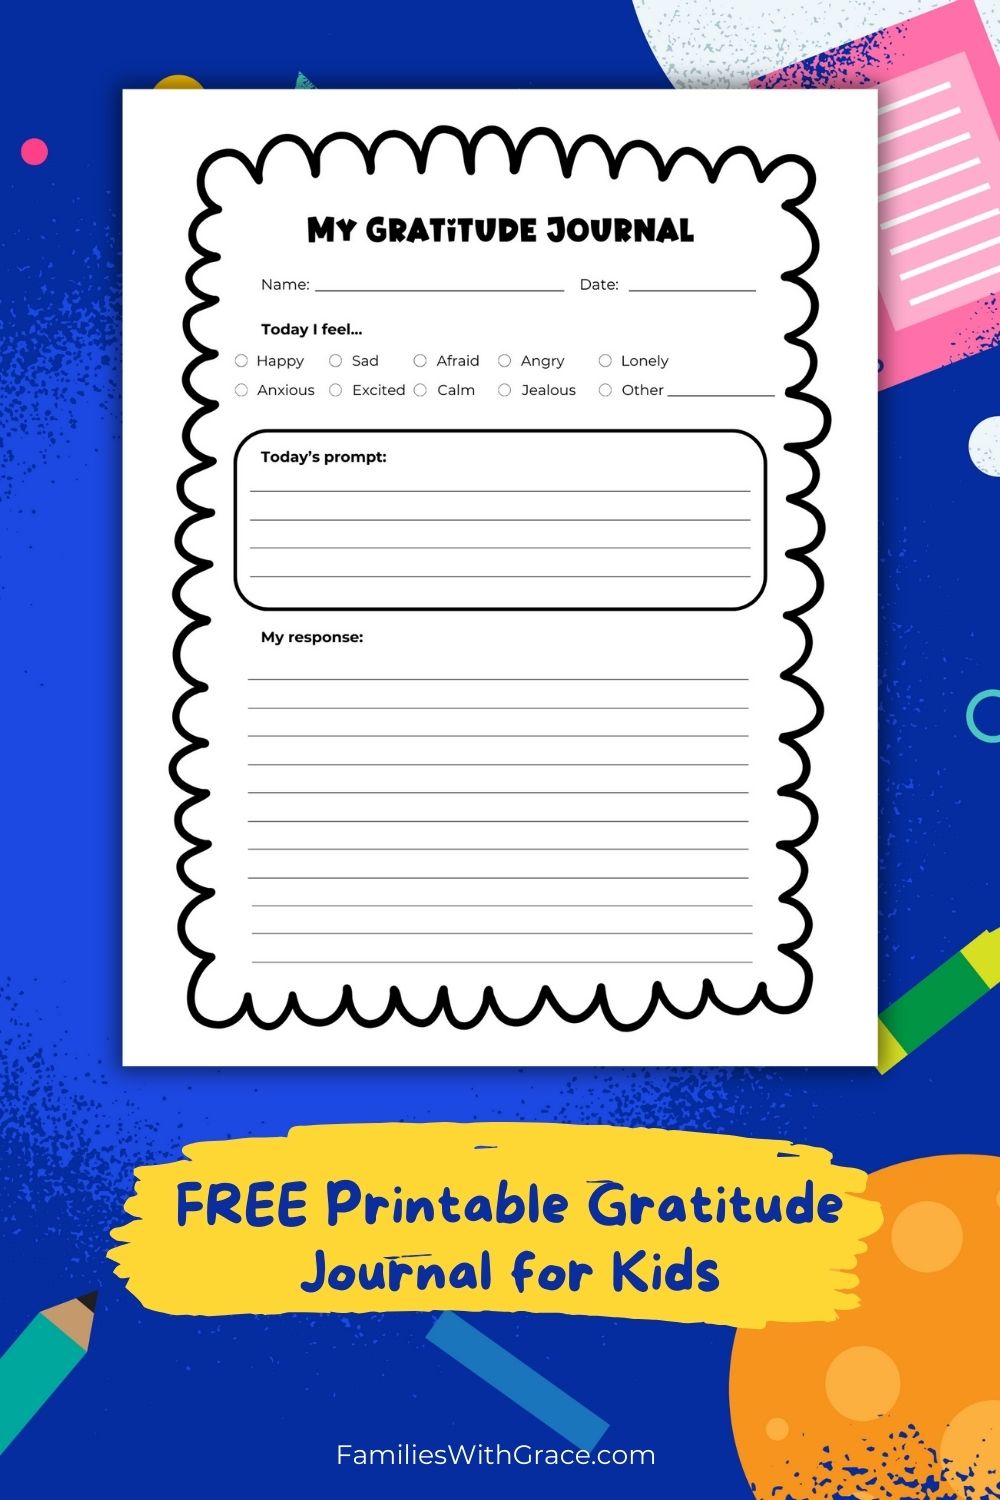 Develop an attitude of gratitude (free printable worksheets)